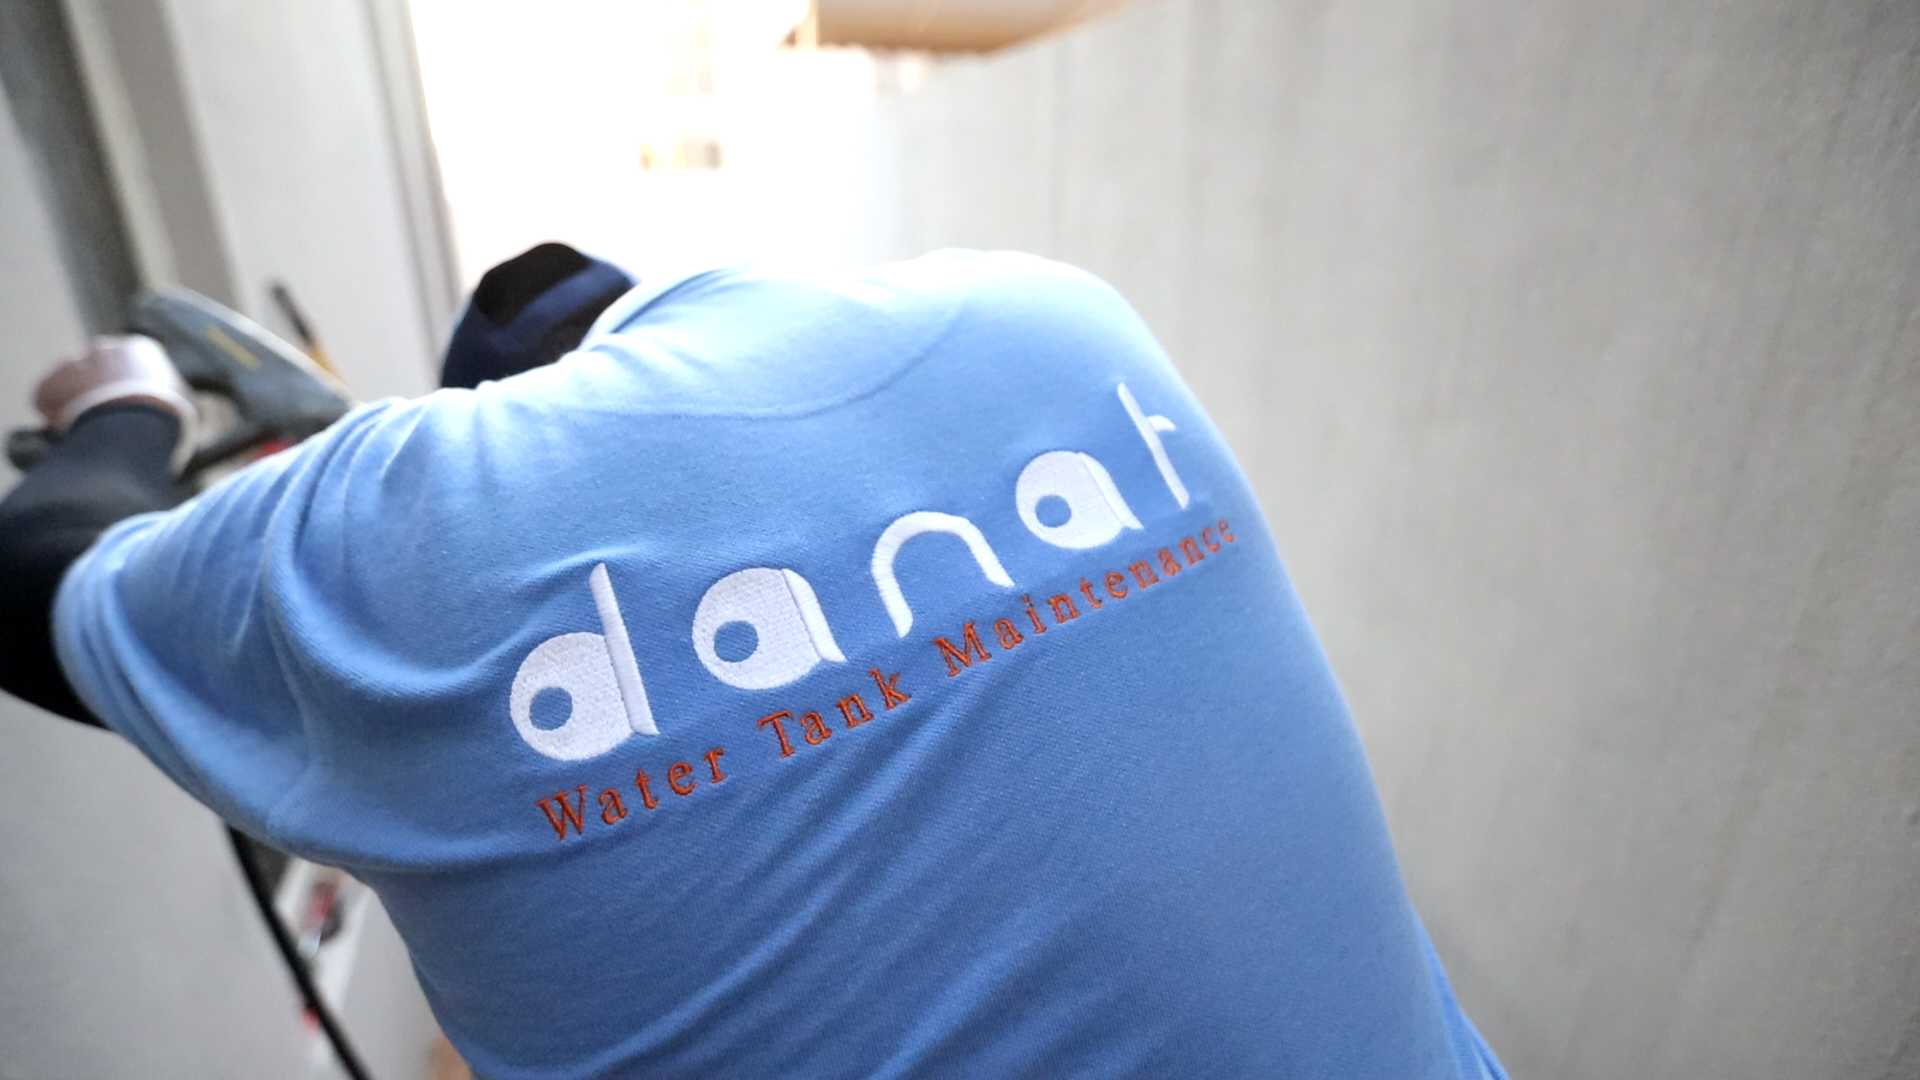 Book Water Tanks Cleaning & Uv Sanitizing | Up To 2000 L Online | Construction Finishes | Qetaat.com